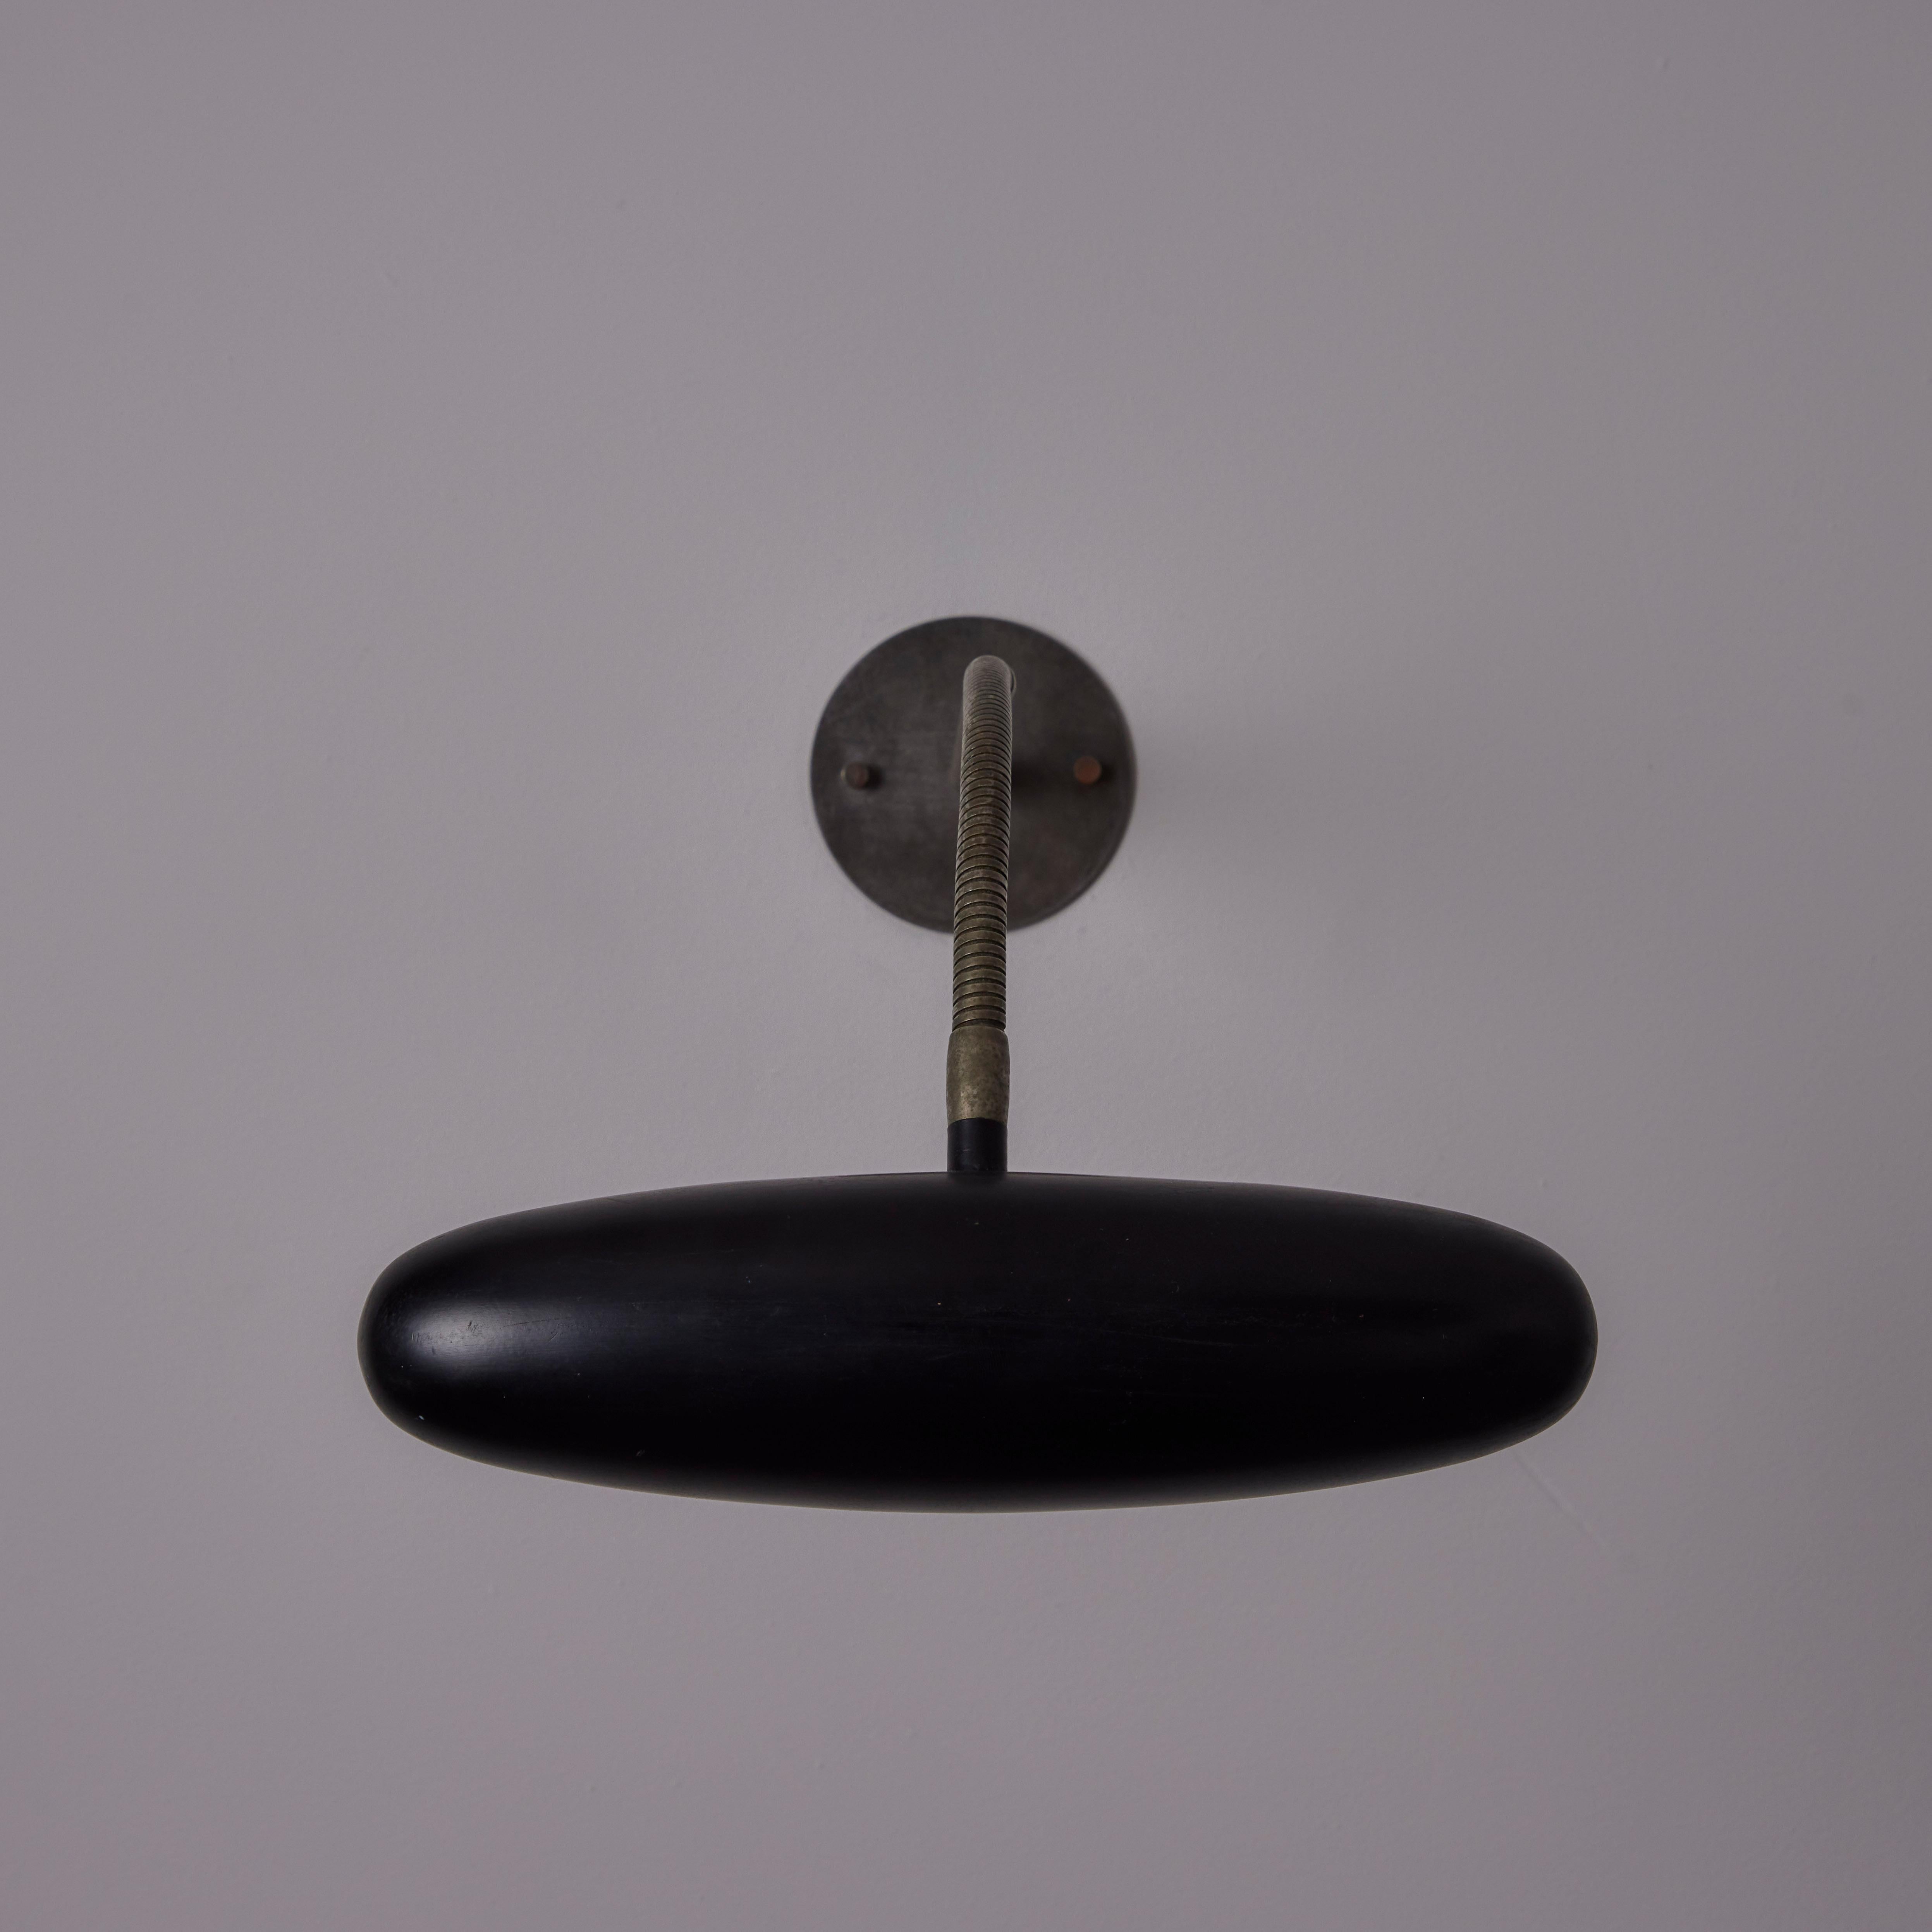 Sconce by Gilardi and Barzaghi. Designed and manufactured in Italy, circa the 1950s. A minimalistic overhead sconce comprising of a black enameled shade and a pewter patinated brass armature. The armature is a flex rod, allowing you to articulate